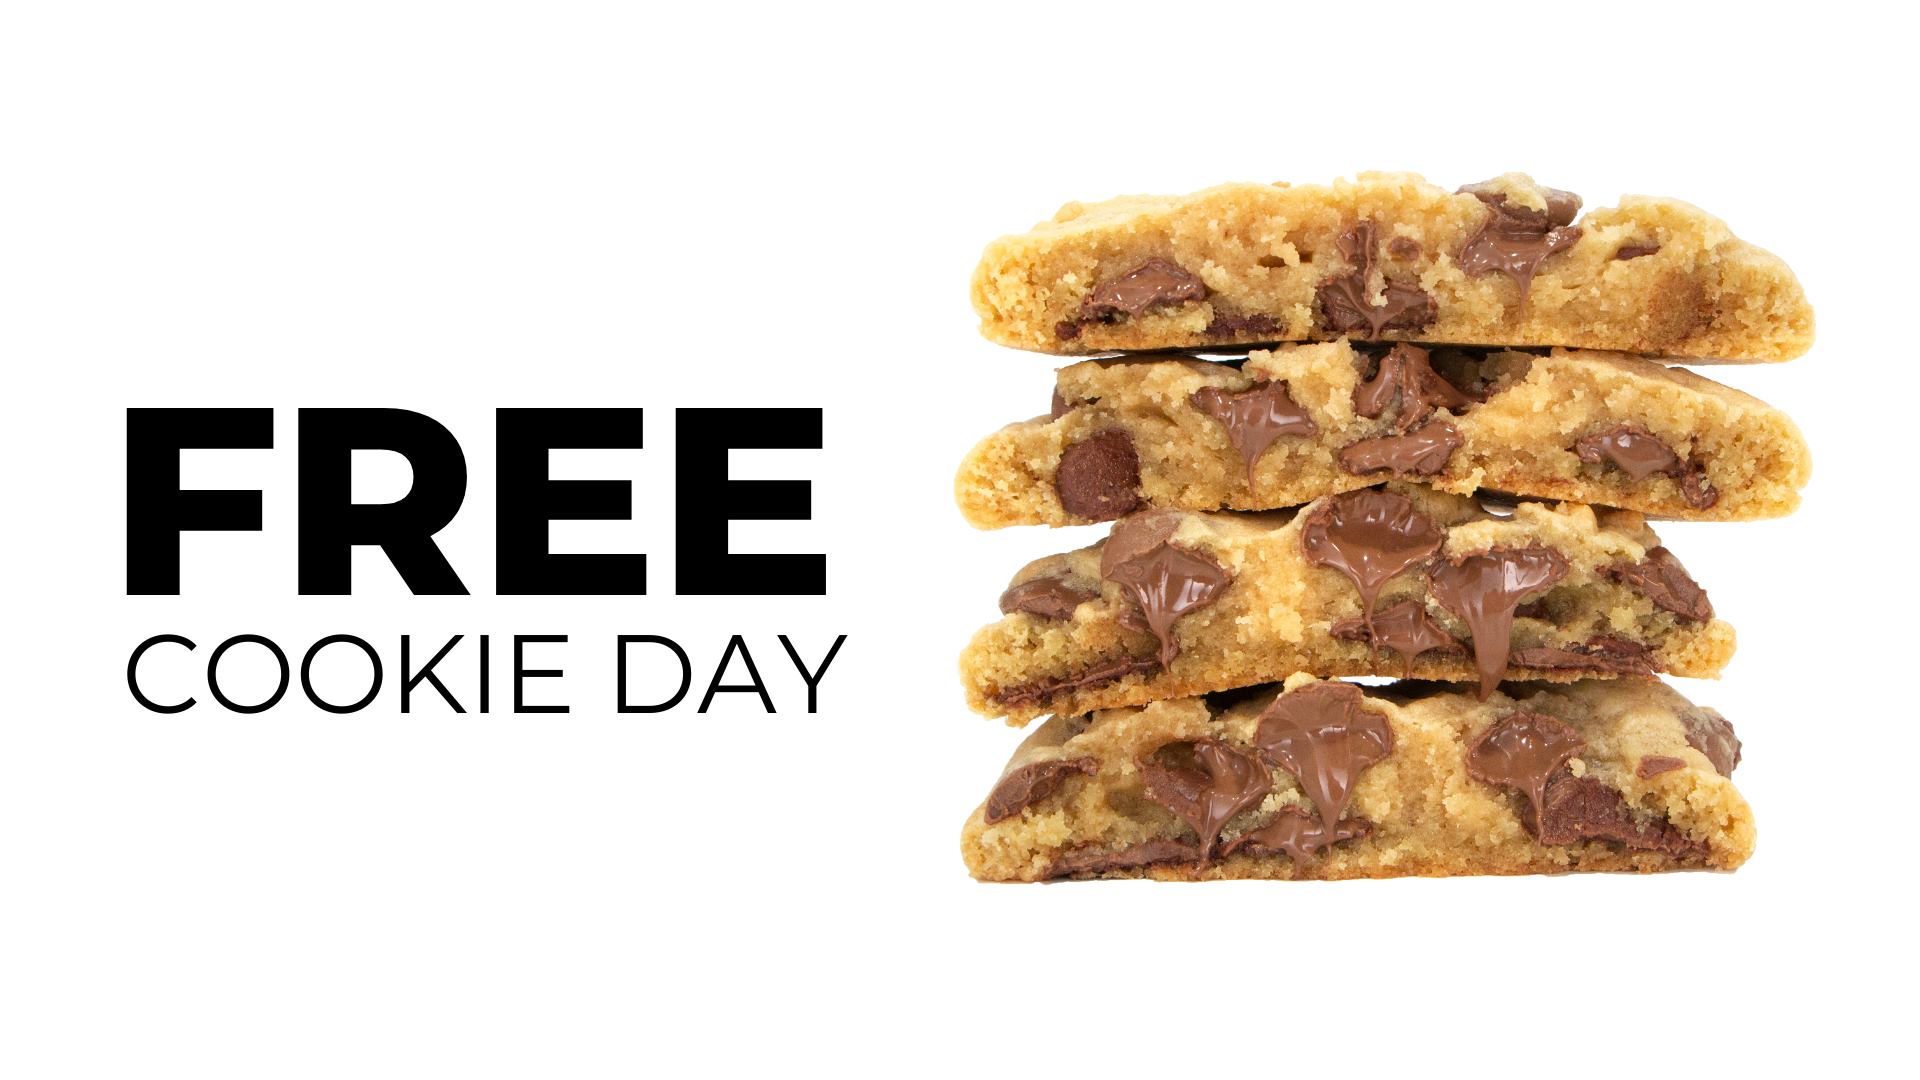 Celebrate ‘Free Cookie Day’ with Frank FM at Crumbl Cookie in Nashua